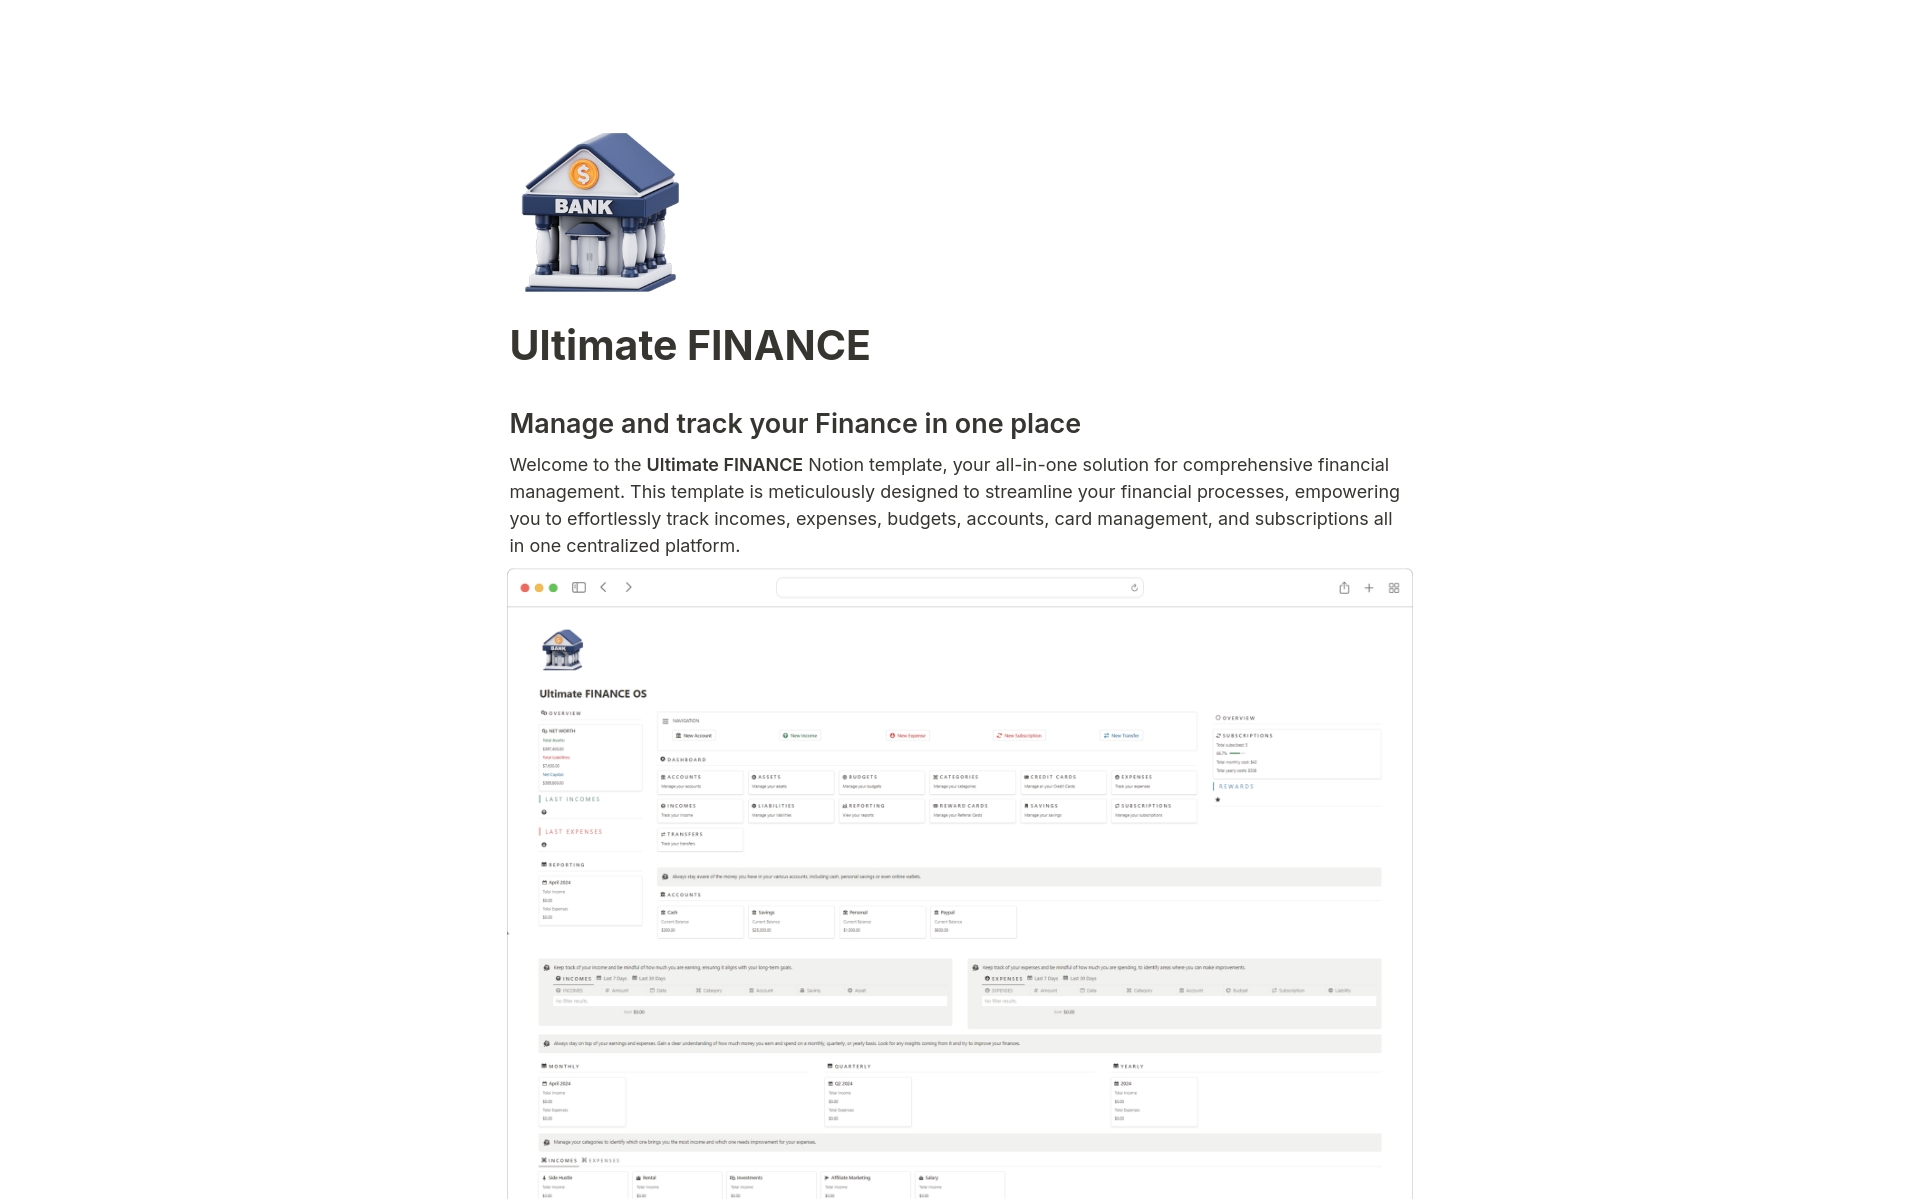 The Ultimate FINANCE makes it super easy to record your incomes and expenses from various accounts and assign them to different categories.